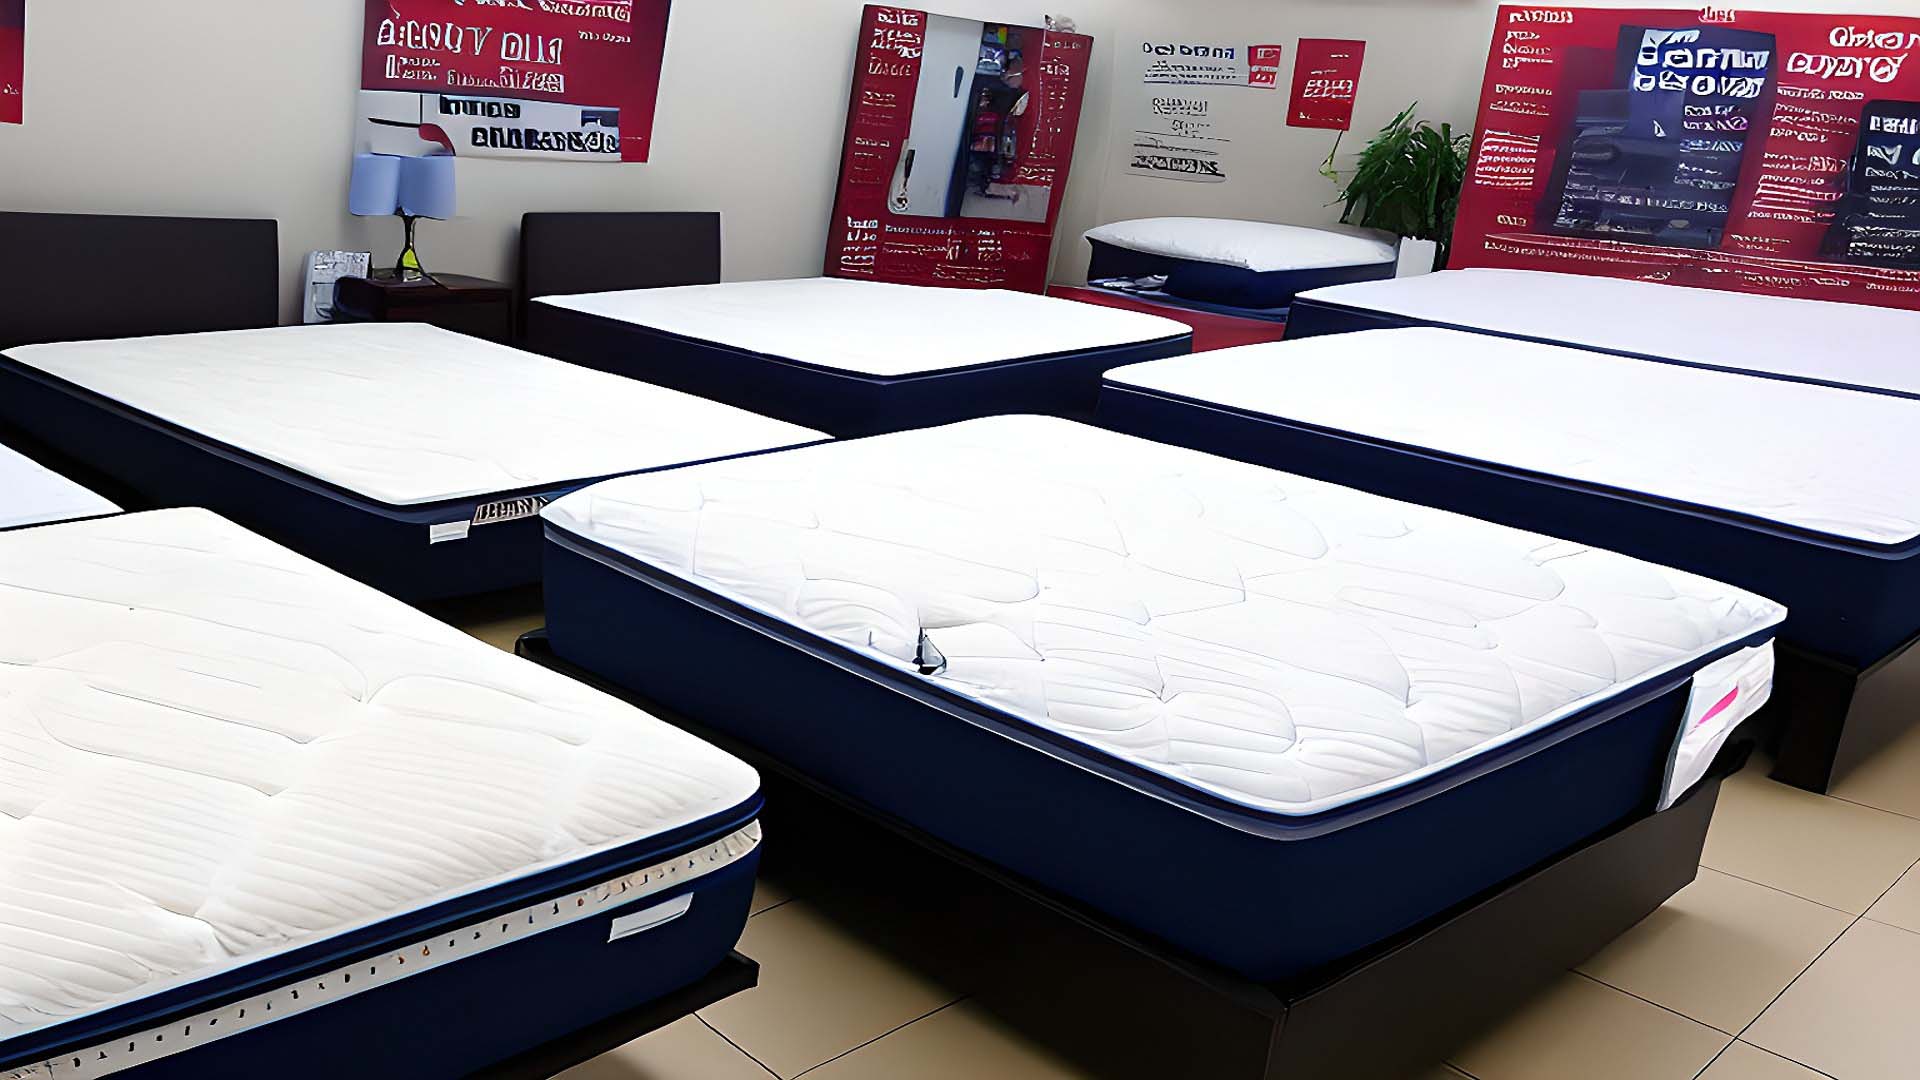 Mattress By Appointment in Tampa, Florida 33601